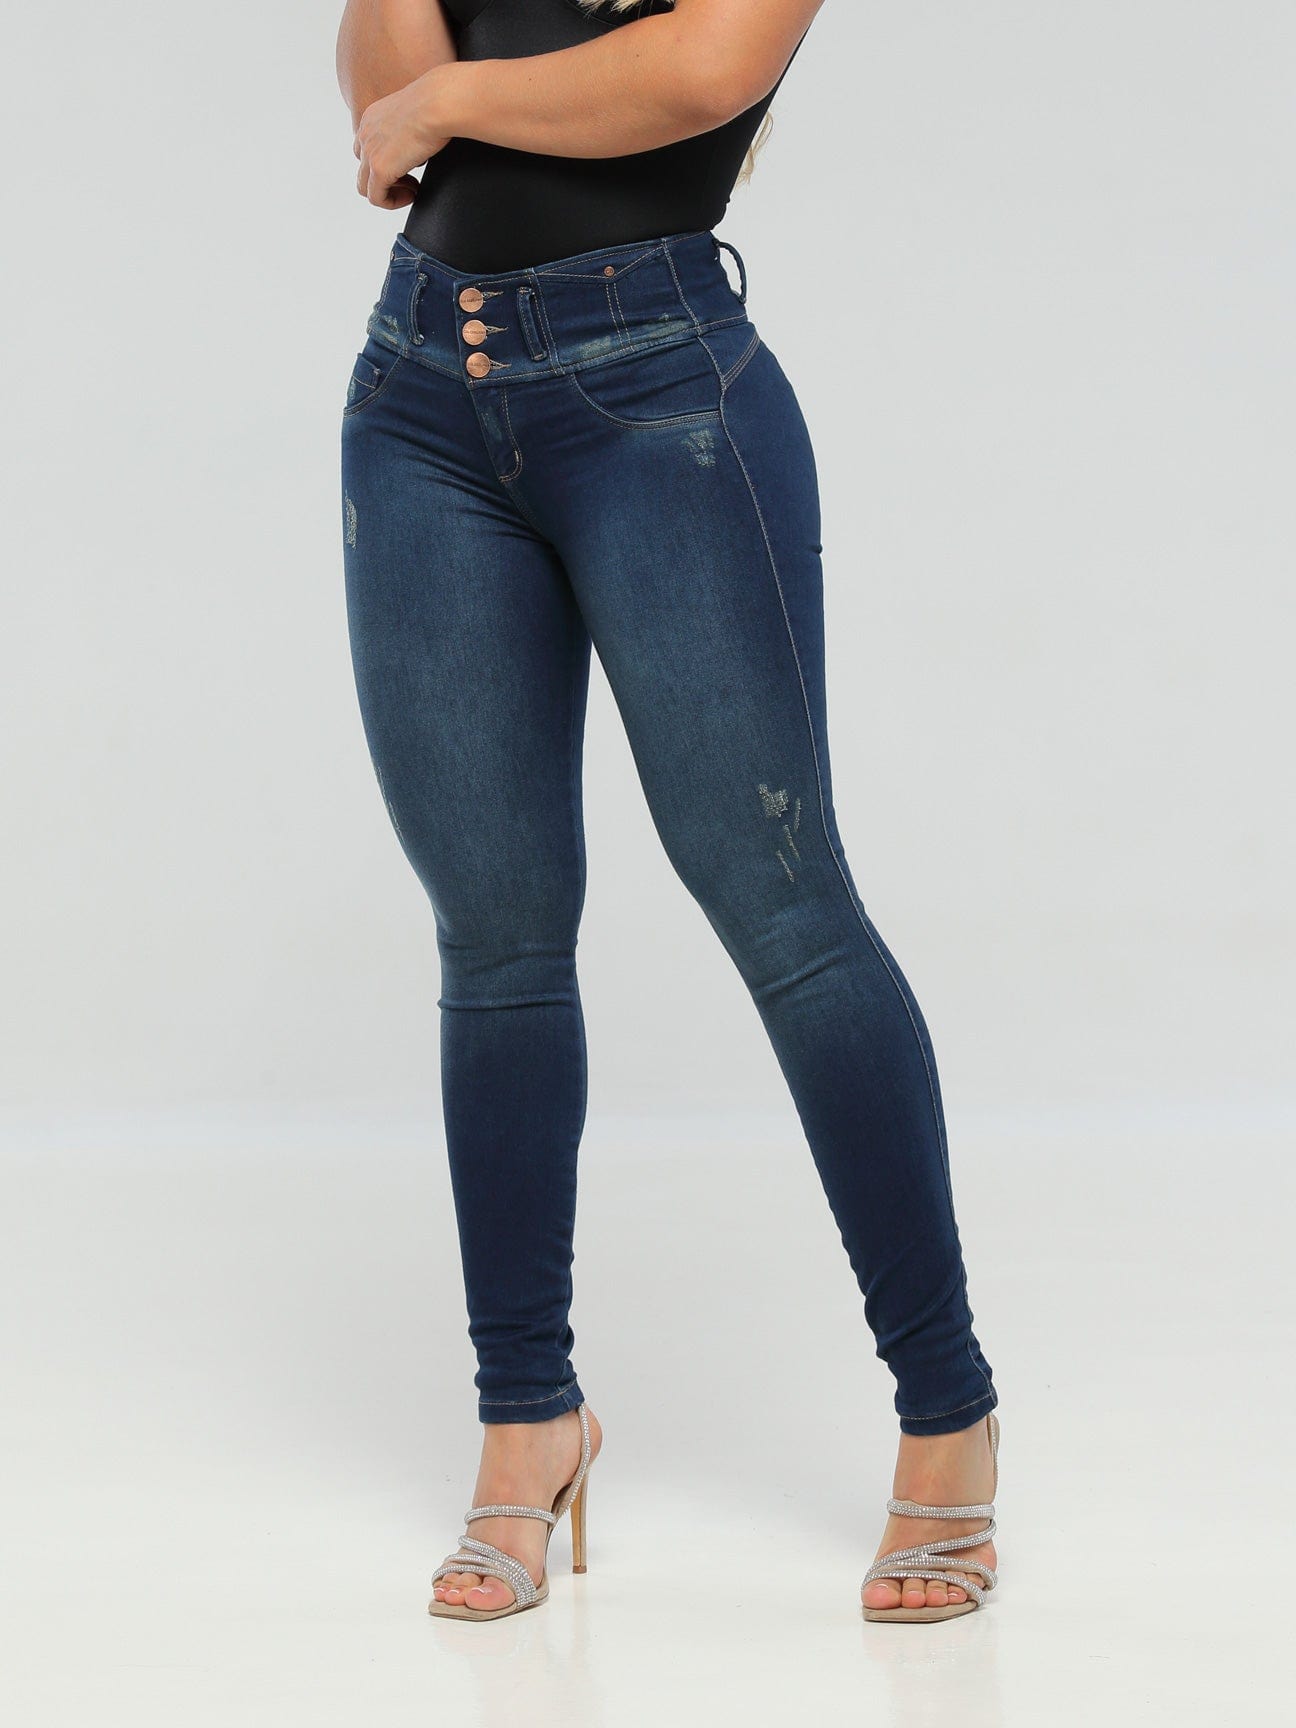 Even if your curves aren't from Colombian genes, Colombian jeans